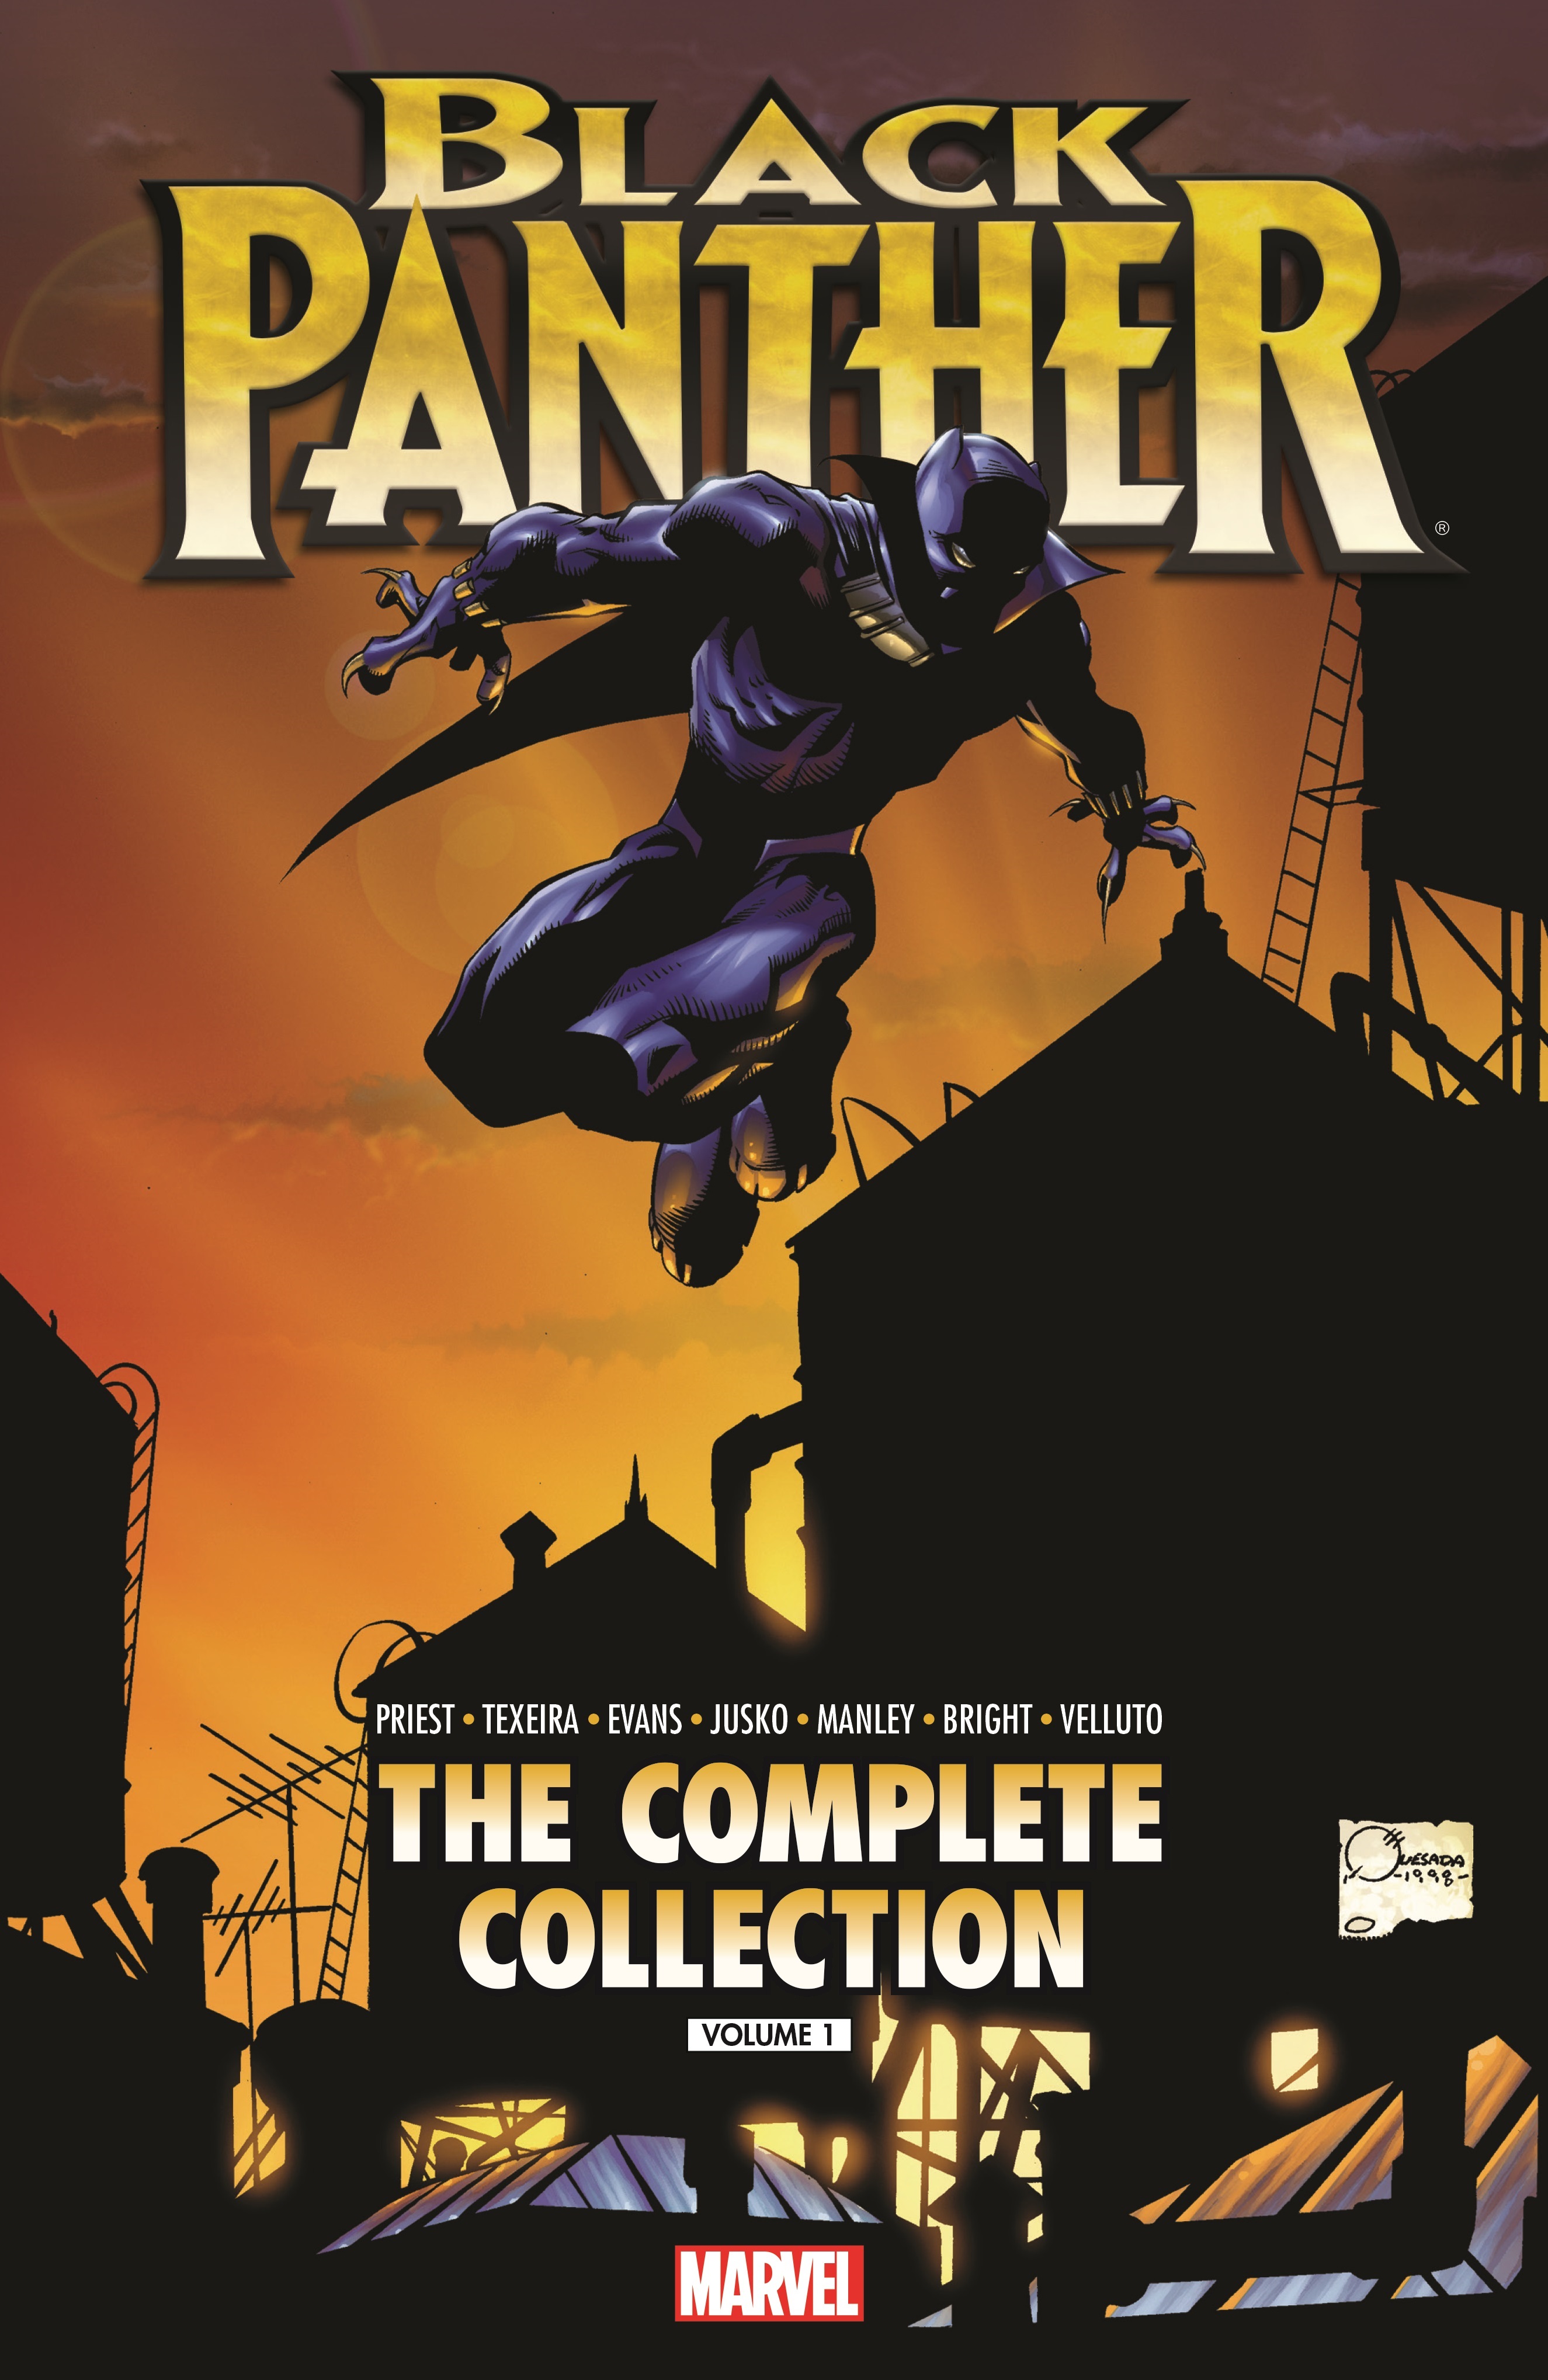 Black Panther by Christopher Priest: The Complete Collection Vol. 1 (Trade Paperback)